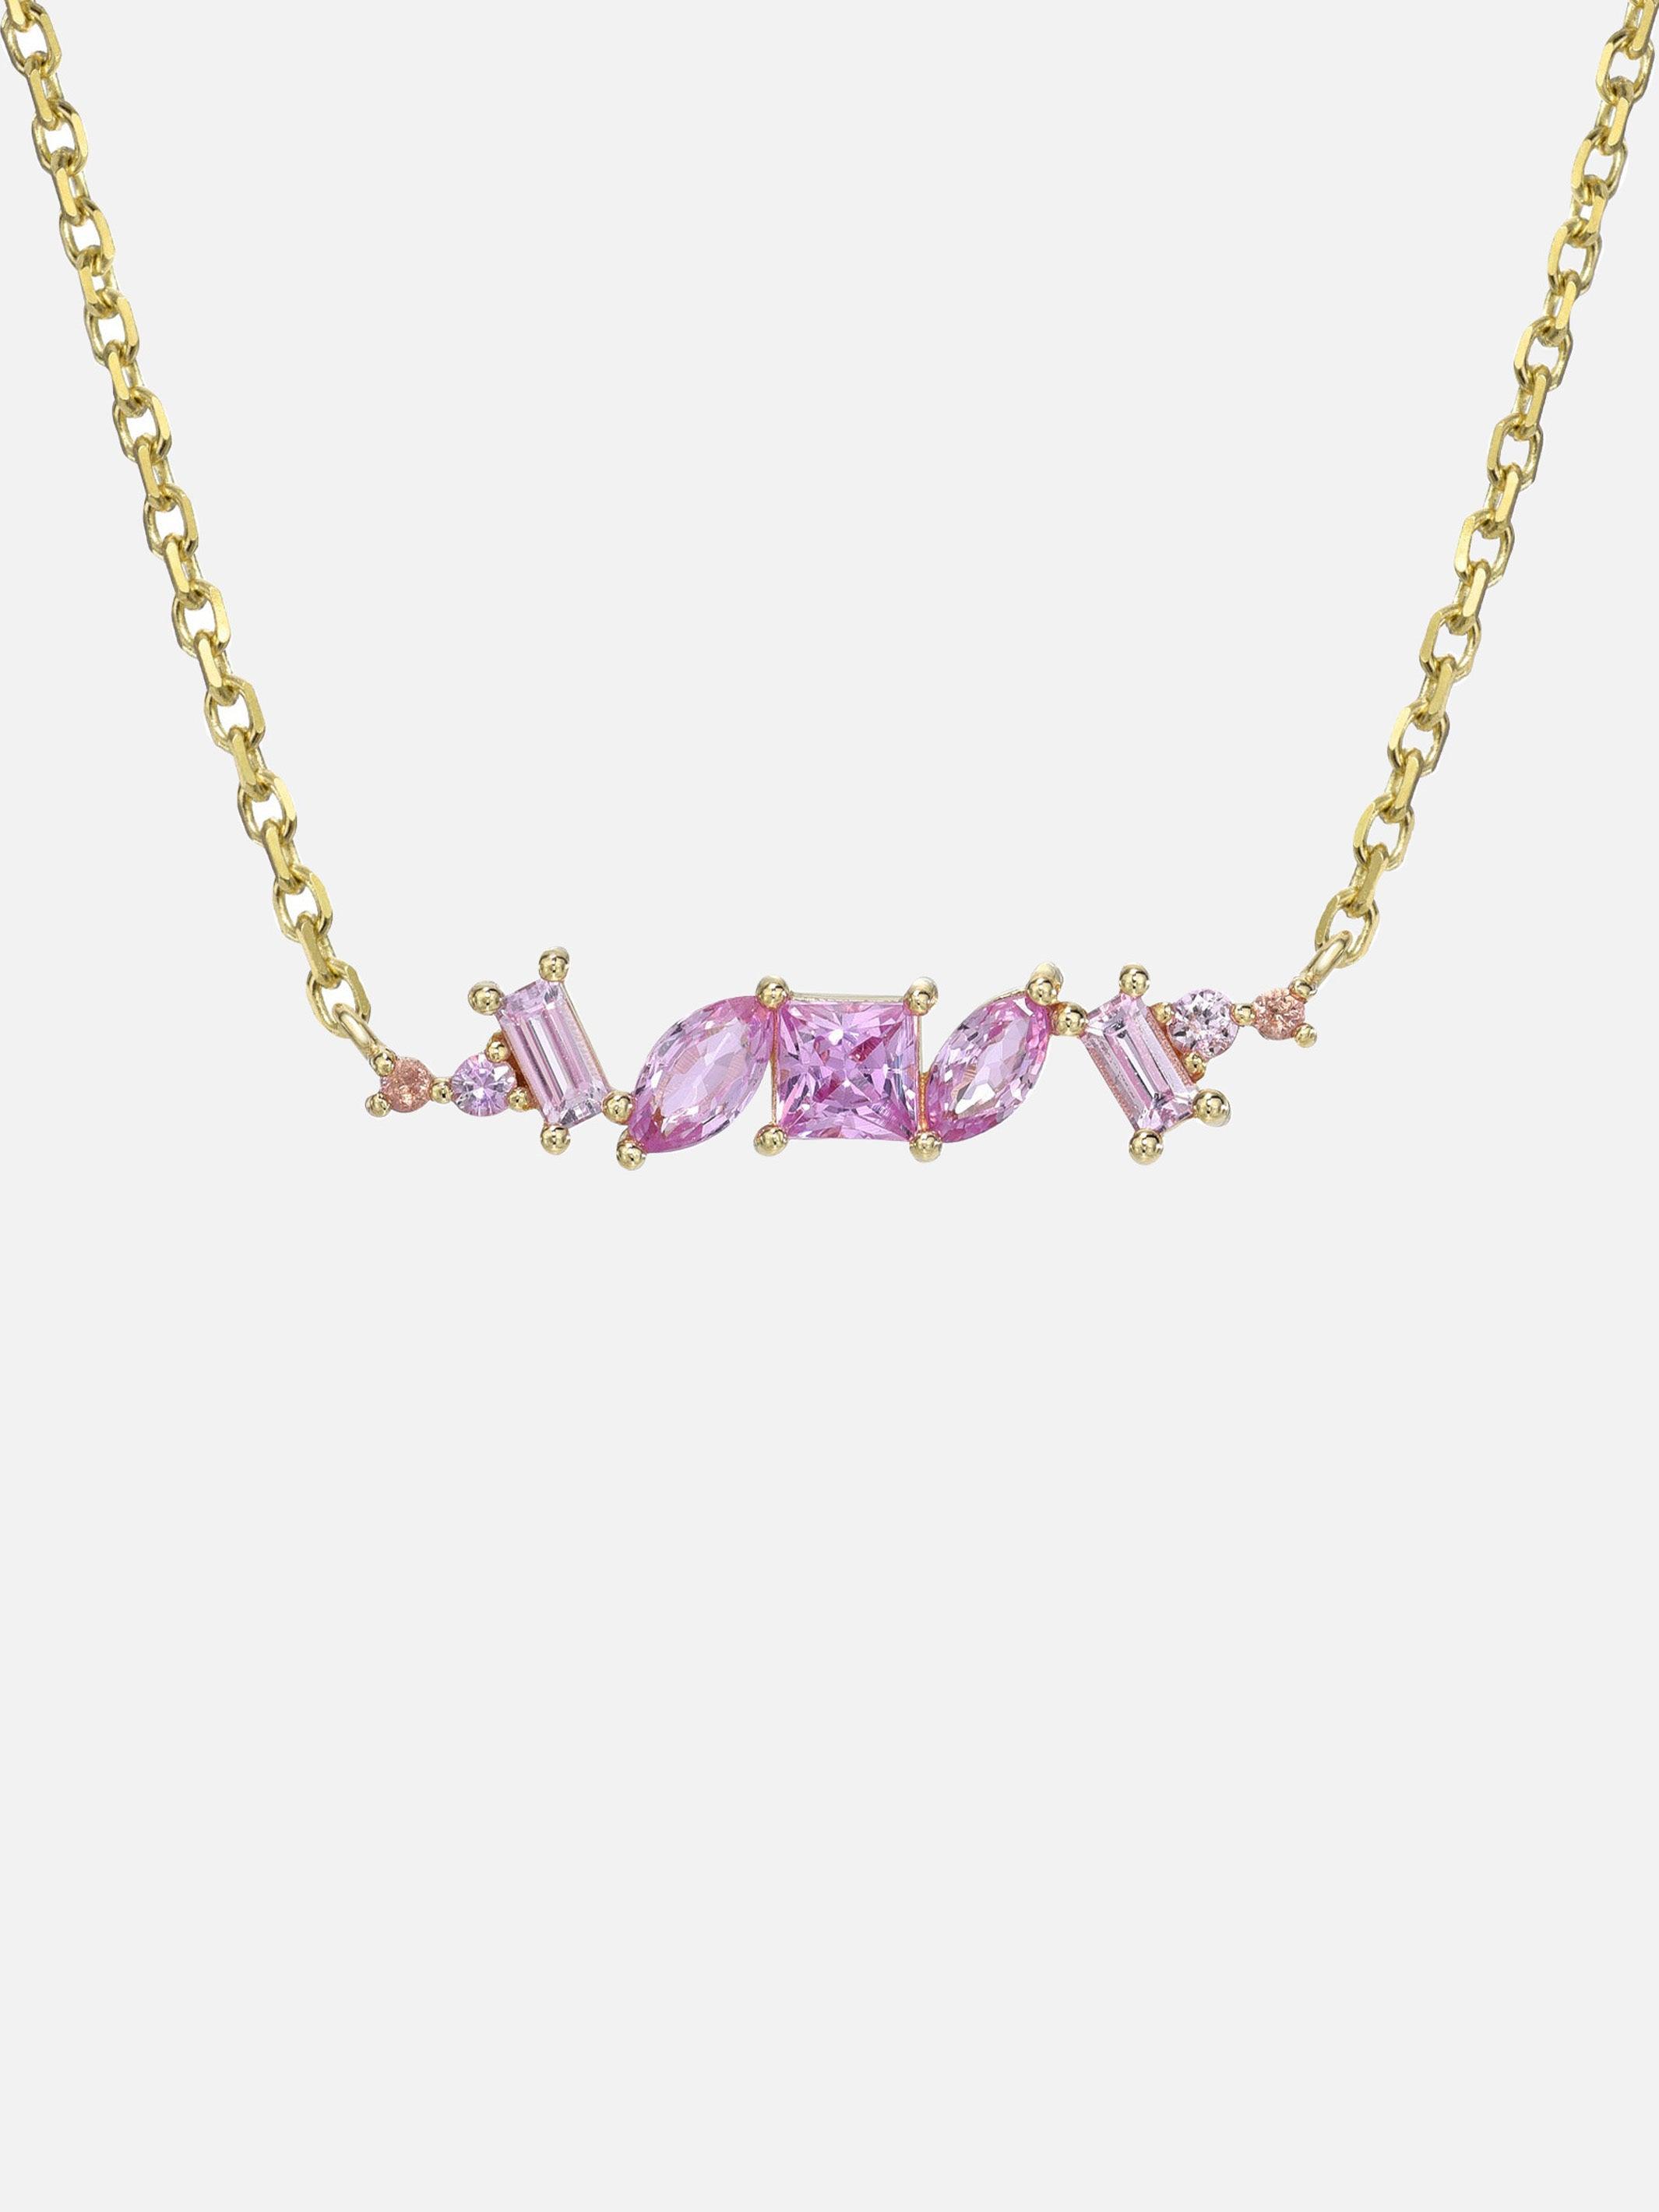 Pink Ombre Chaos Necklace - Meredith Young - At Present